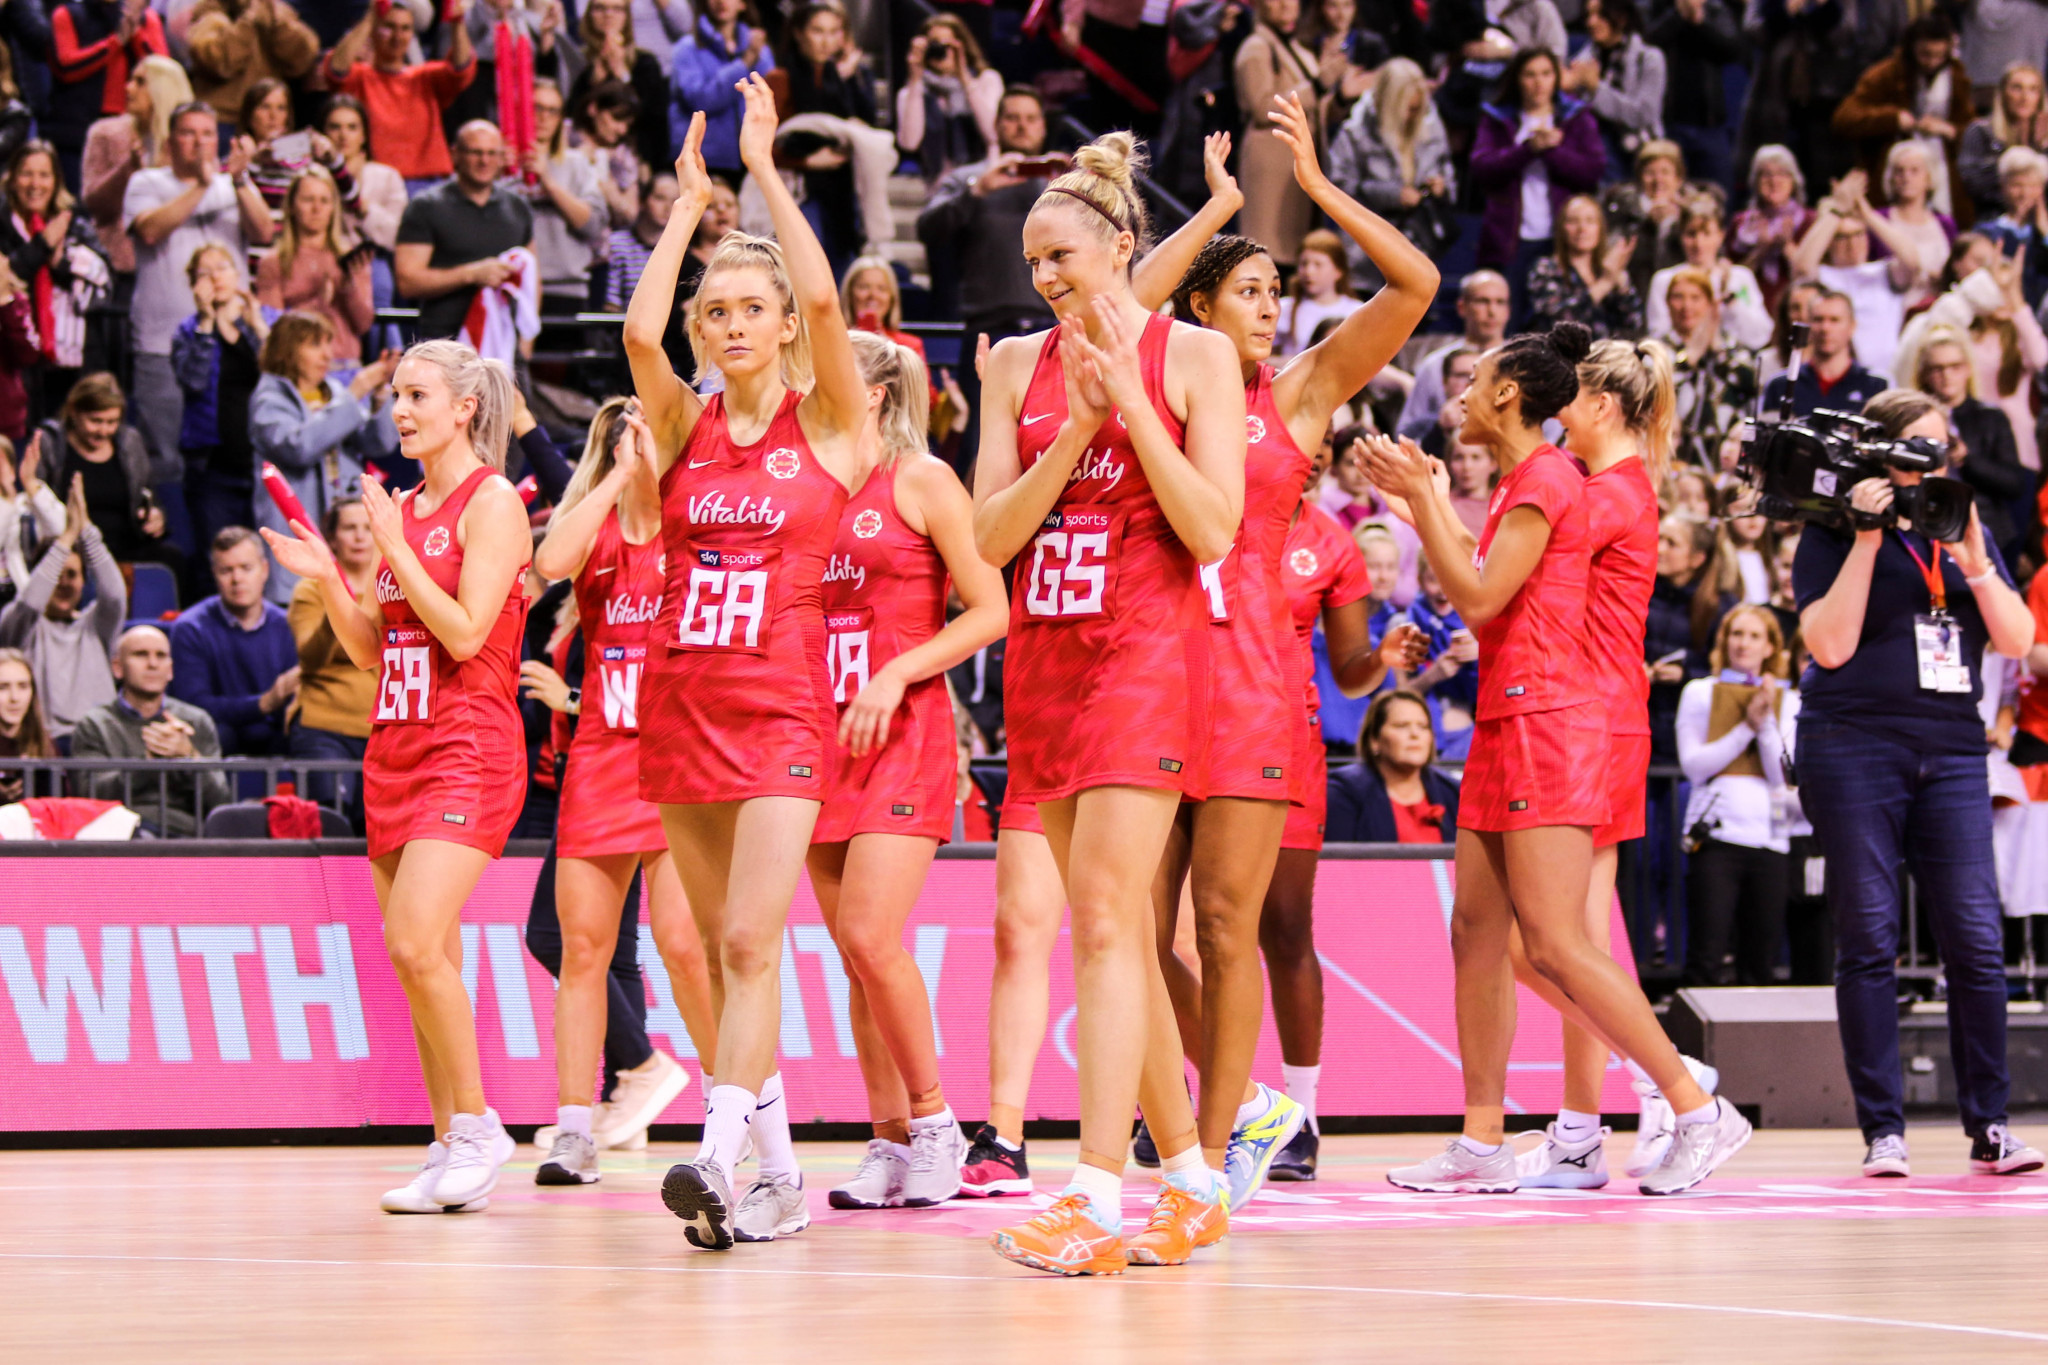 The Vitality Roses are preparing for the 2019 World Cup in Liverpool ©Eliza Morgan/England Netball